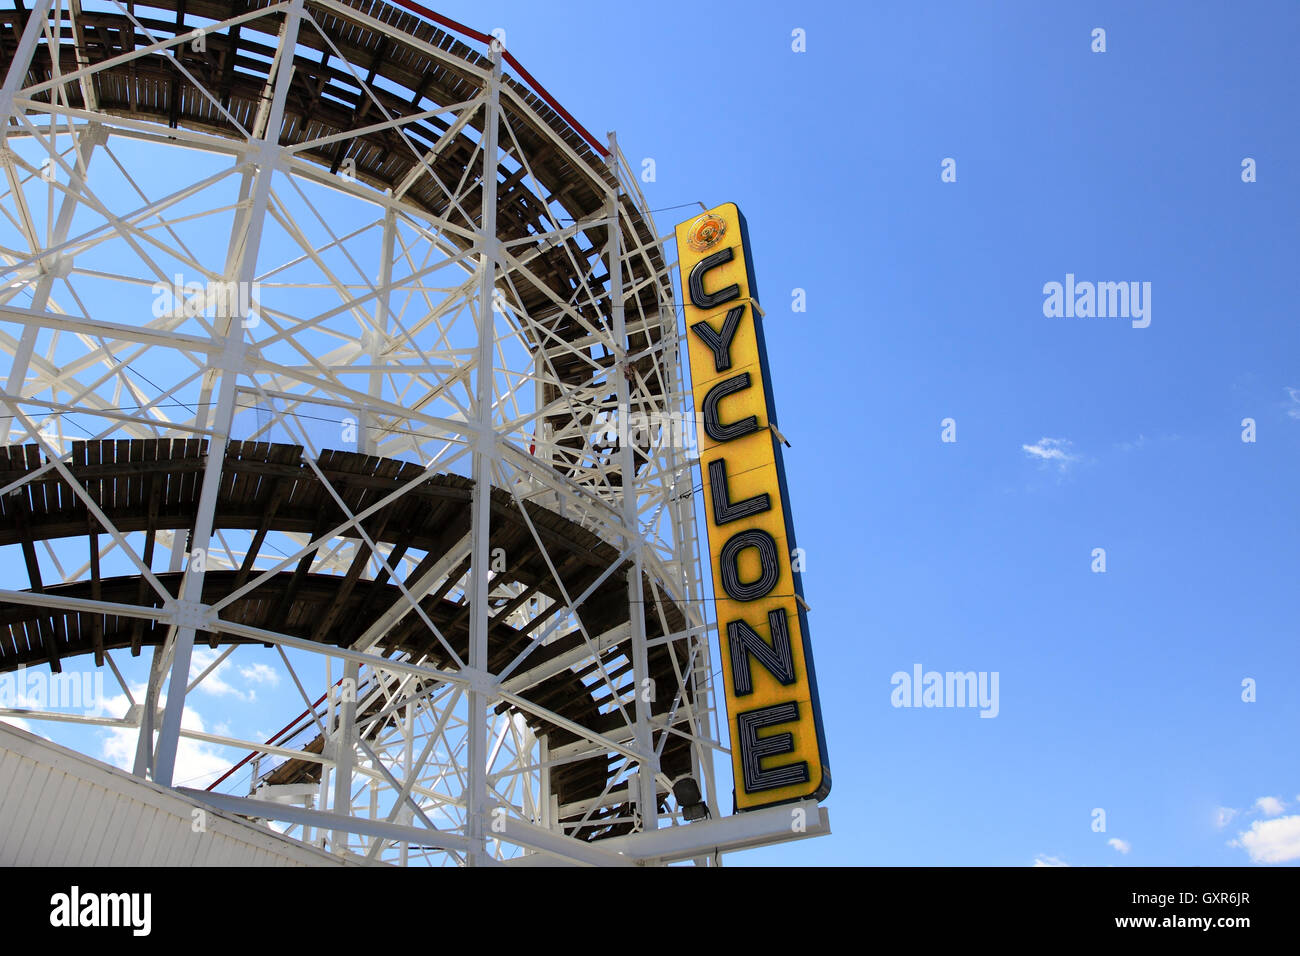 Le famose Montagne russe Ciclone Coney Island Brooklyn New York City Foto Stock